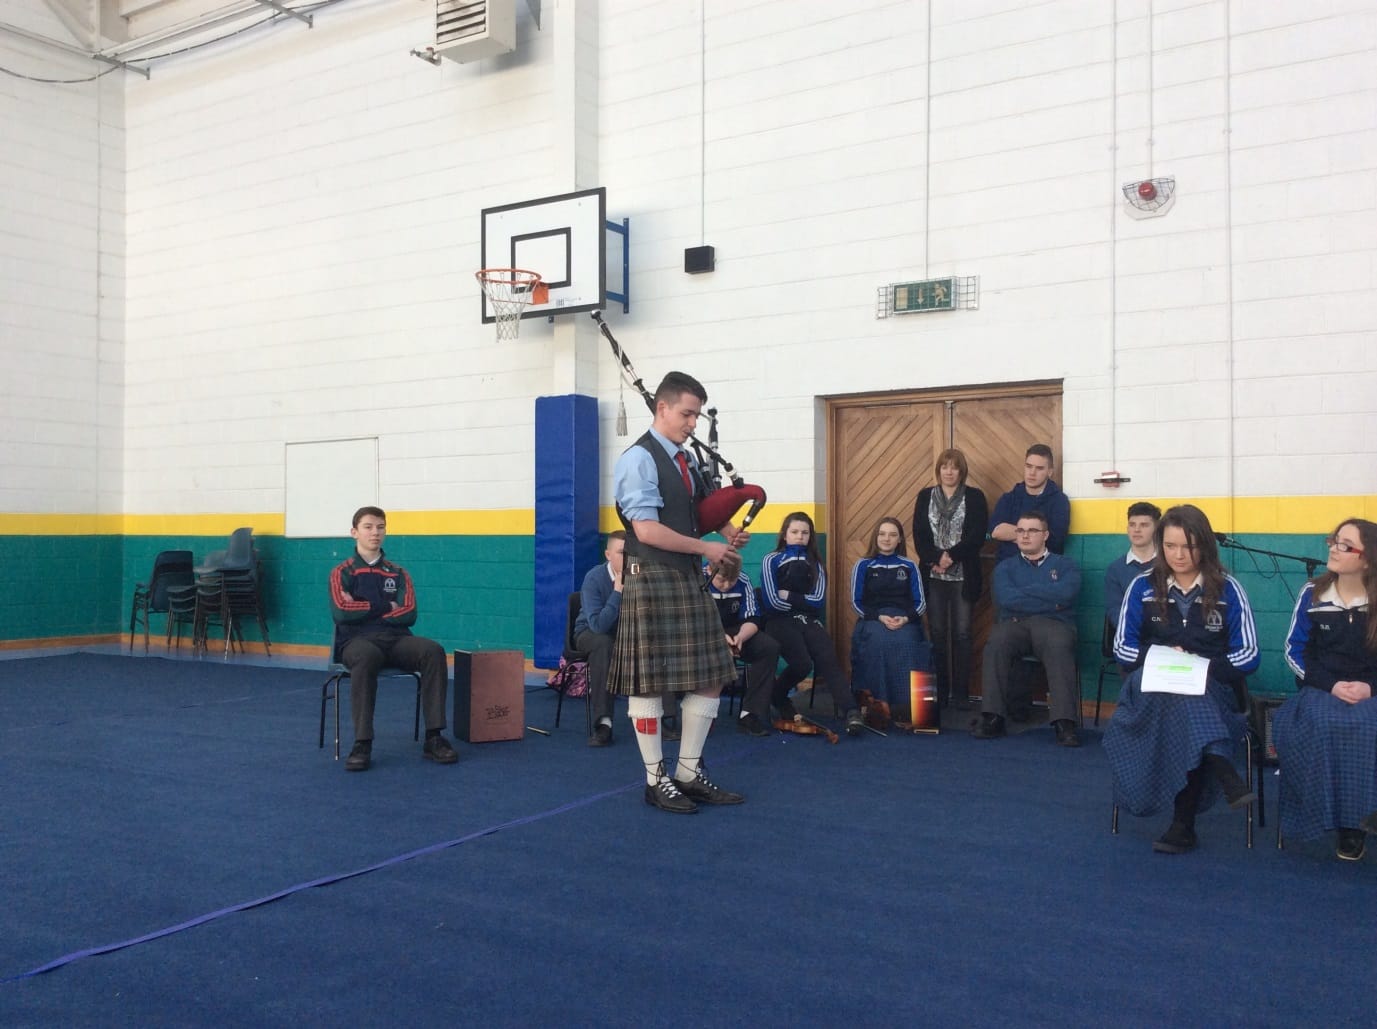 March 2016: Johnny Hunt treated us to some fantastic bagpipe playing during the 1916 commemoration in Desmond College